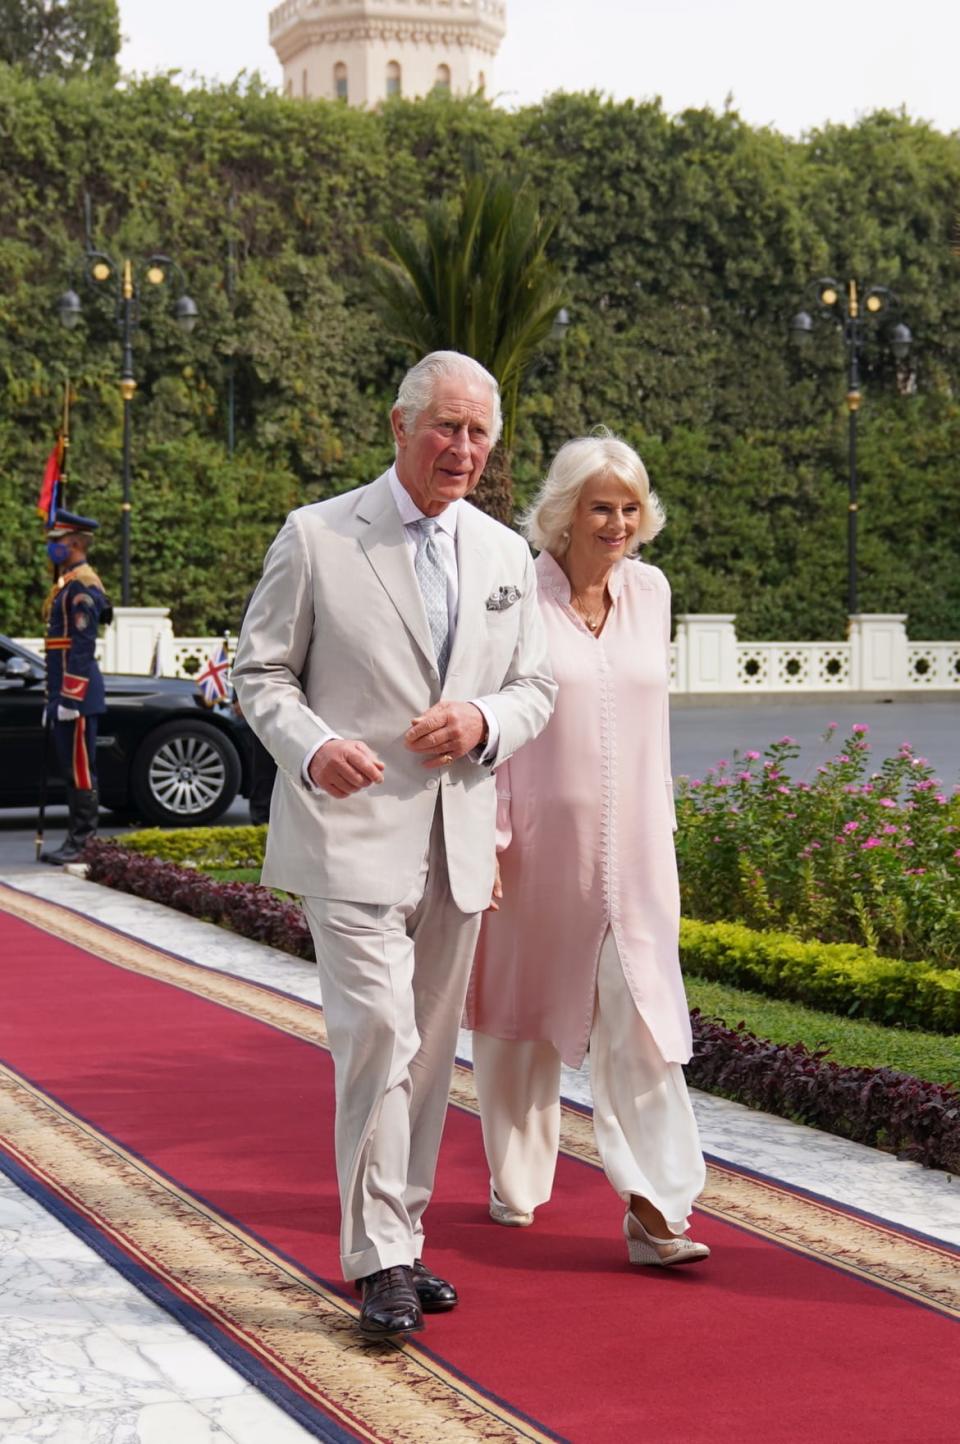 div class="inline-image__caption"pBritain's Charles, Prince of Wales, and Camilla, Duchess of Cornwall, arrive to meet Egypt's President Abdel Fattah el-Sisi and First Lady Entissar Amer at Al-Ittihadiya Palace, on the third day of their tour of the Middle East, in Cairo, Egypt November 18, 2021./p/div div class="inline-image__credit"Joe Giddens/Pool via REUTERS/div